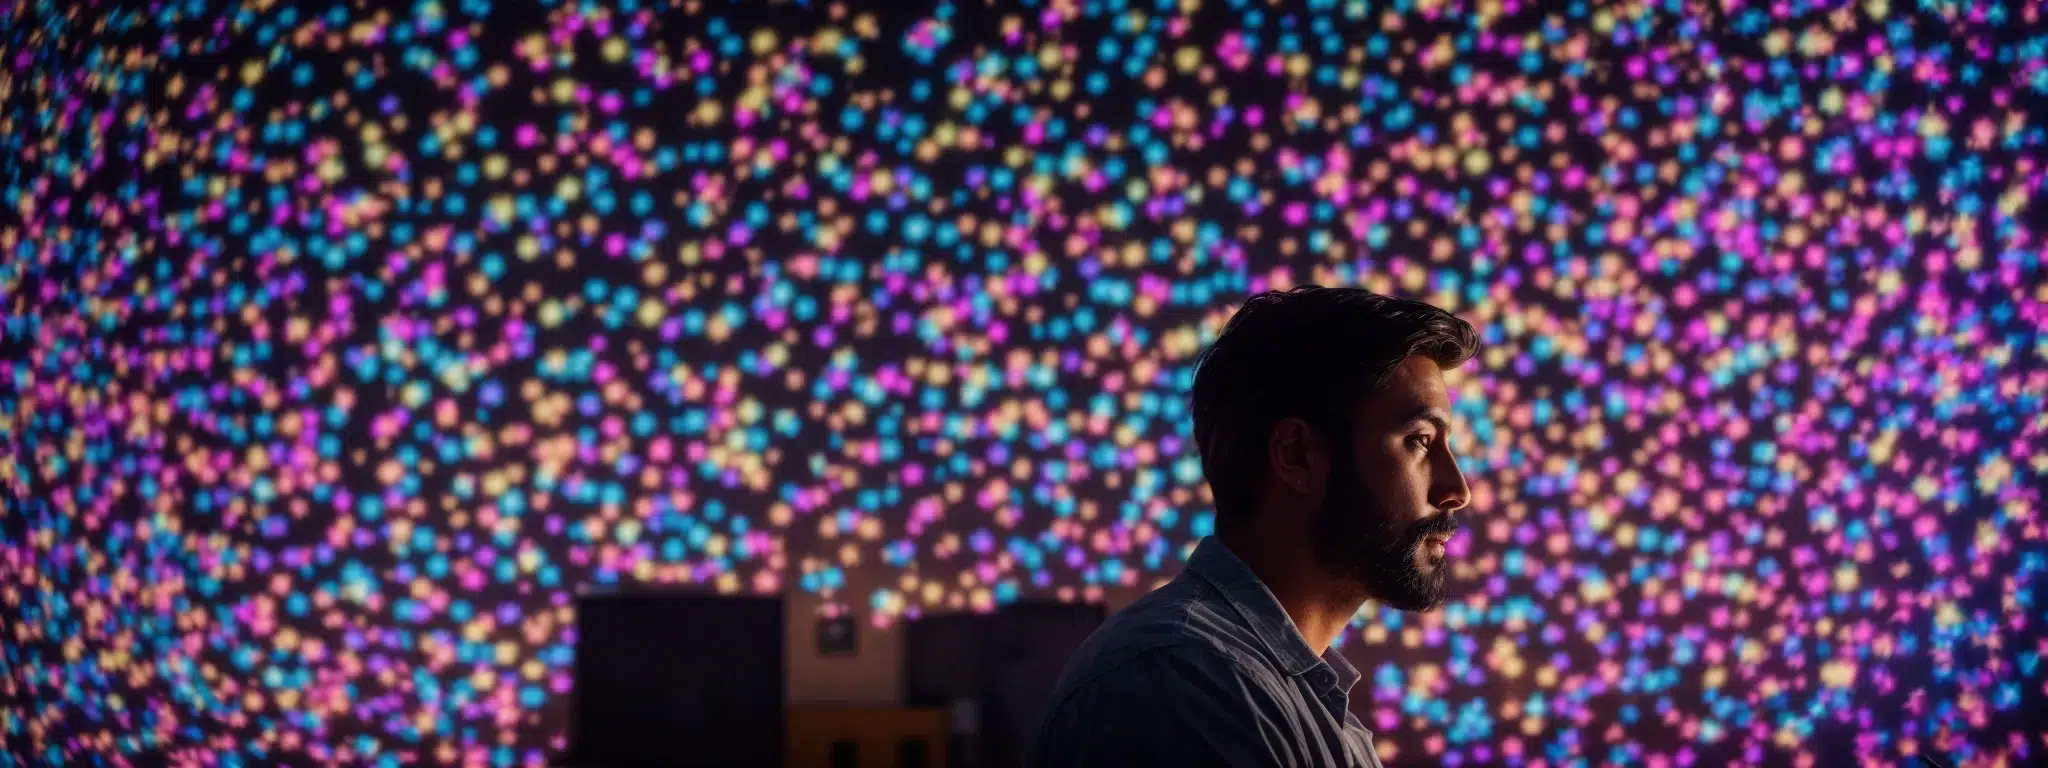 A Marketer Gazes Intently At A Large, Glowing Screen Filled With Colorful Email Campaign Analytics.